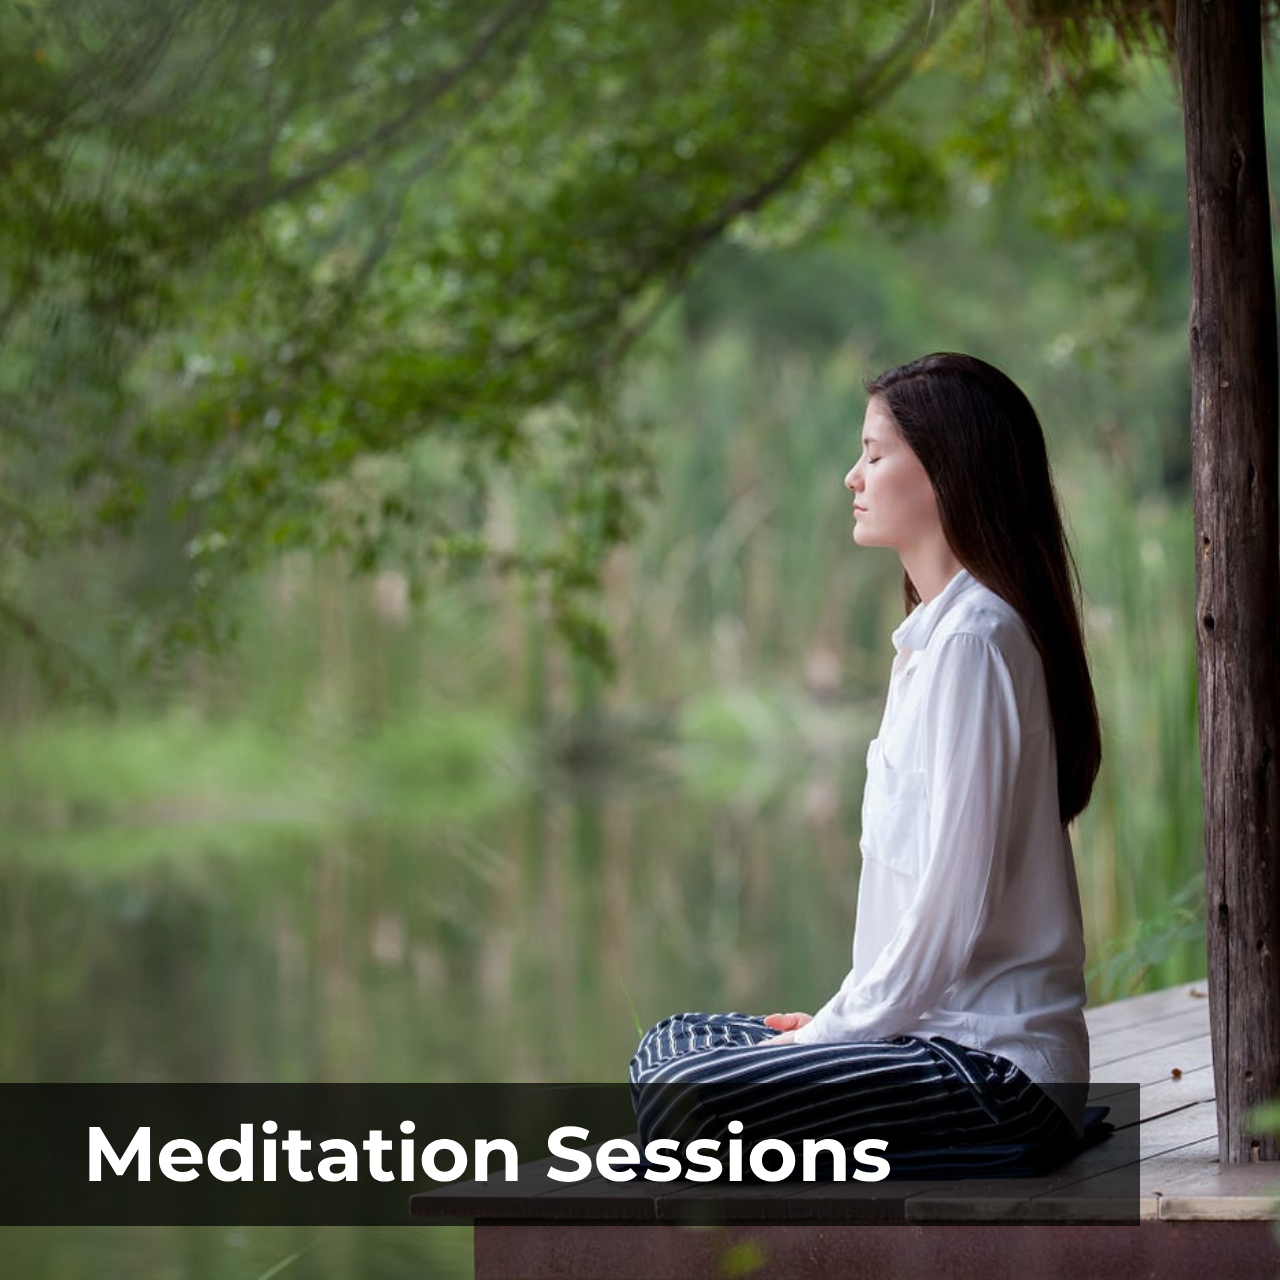 Weekly Meditation Sessions